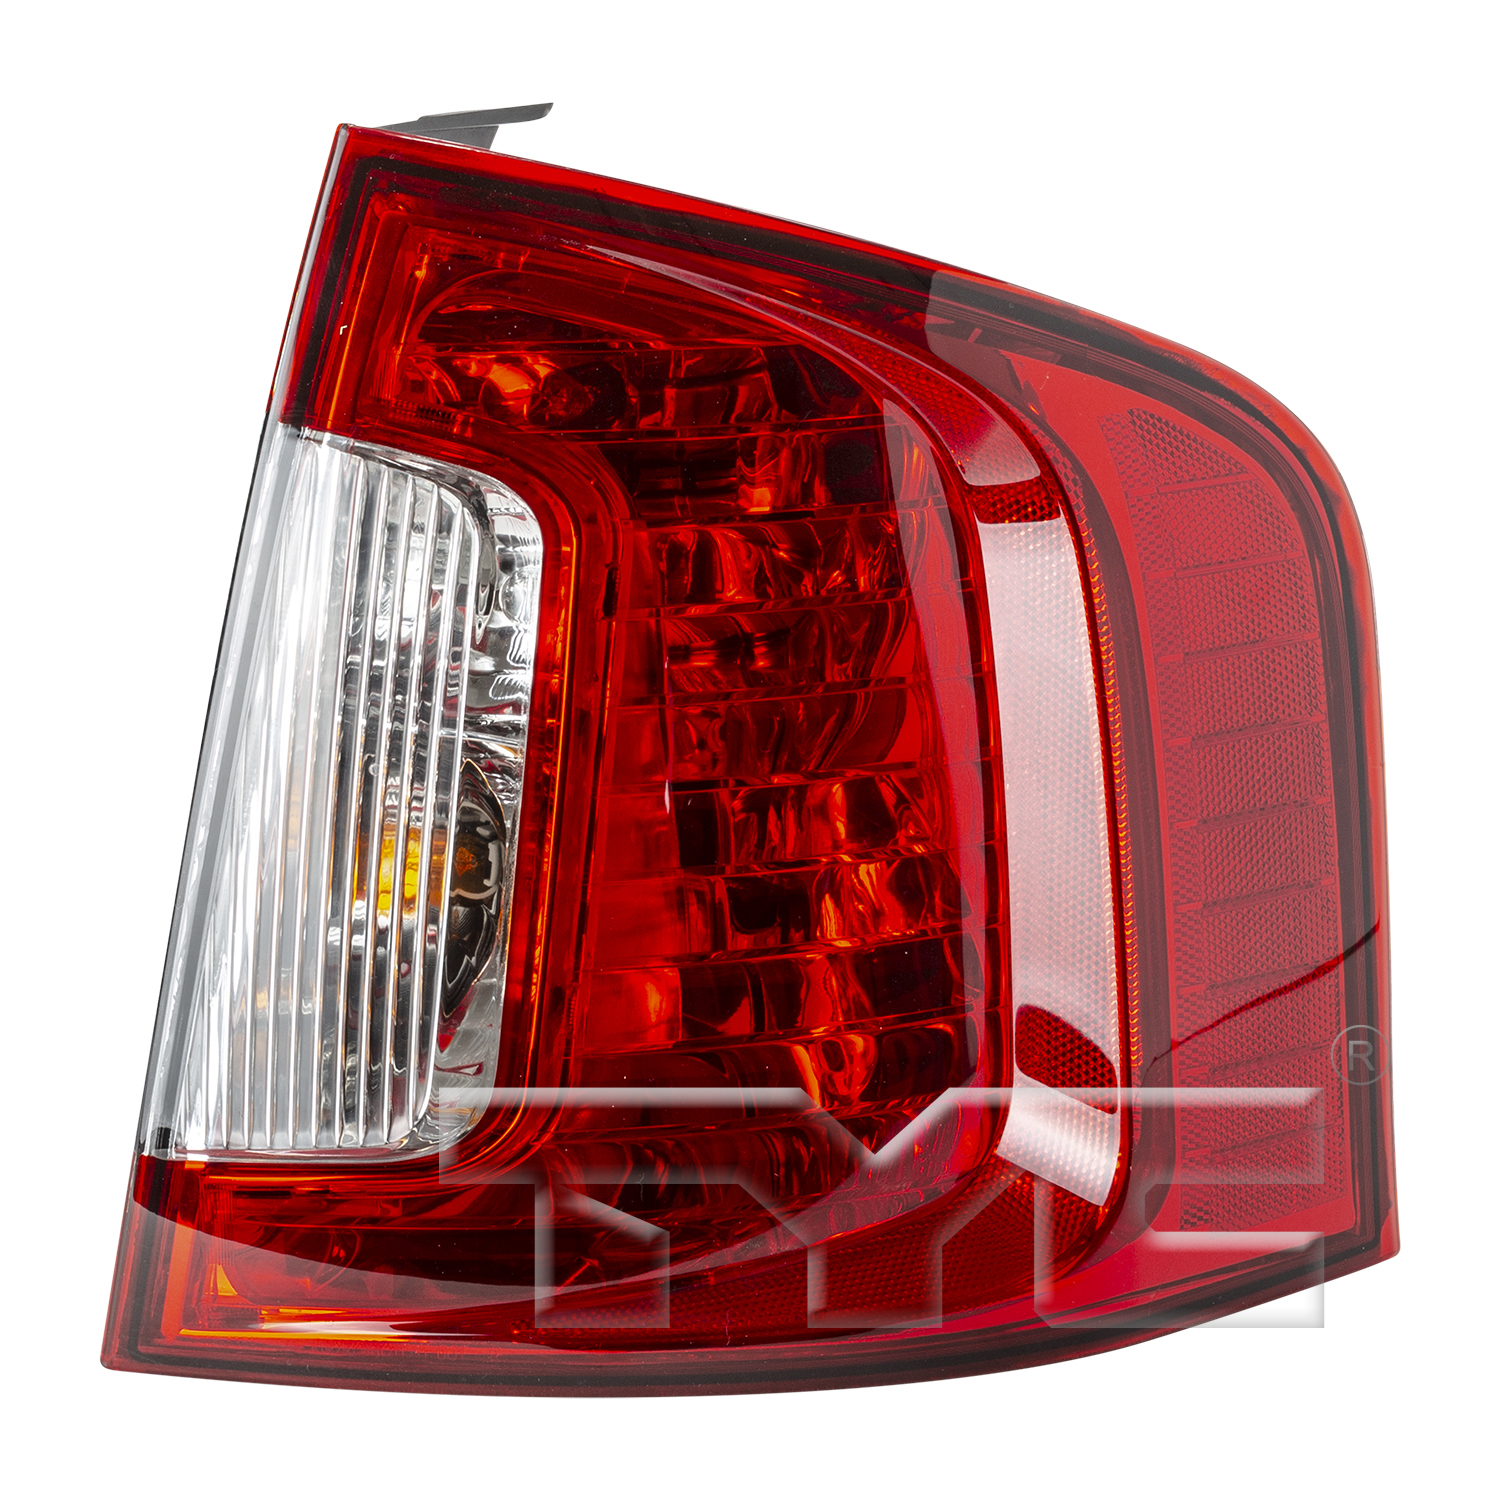 Aftermarket TAILLIGHTS for FORD - EDGE, EDGE,11-14,RT Taillamp assy